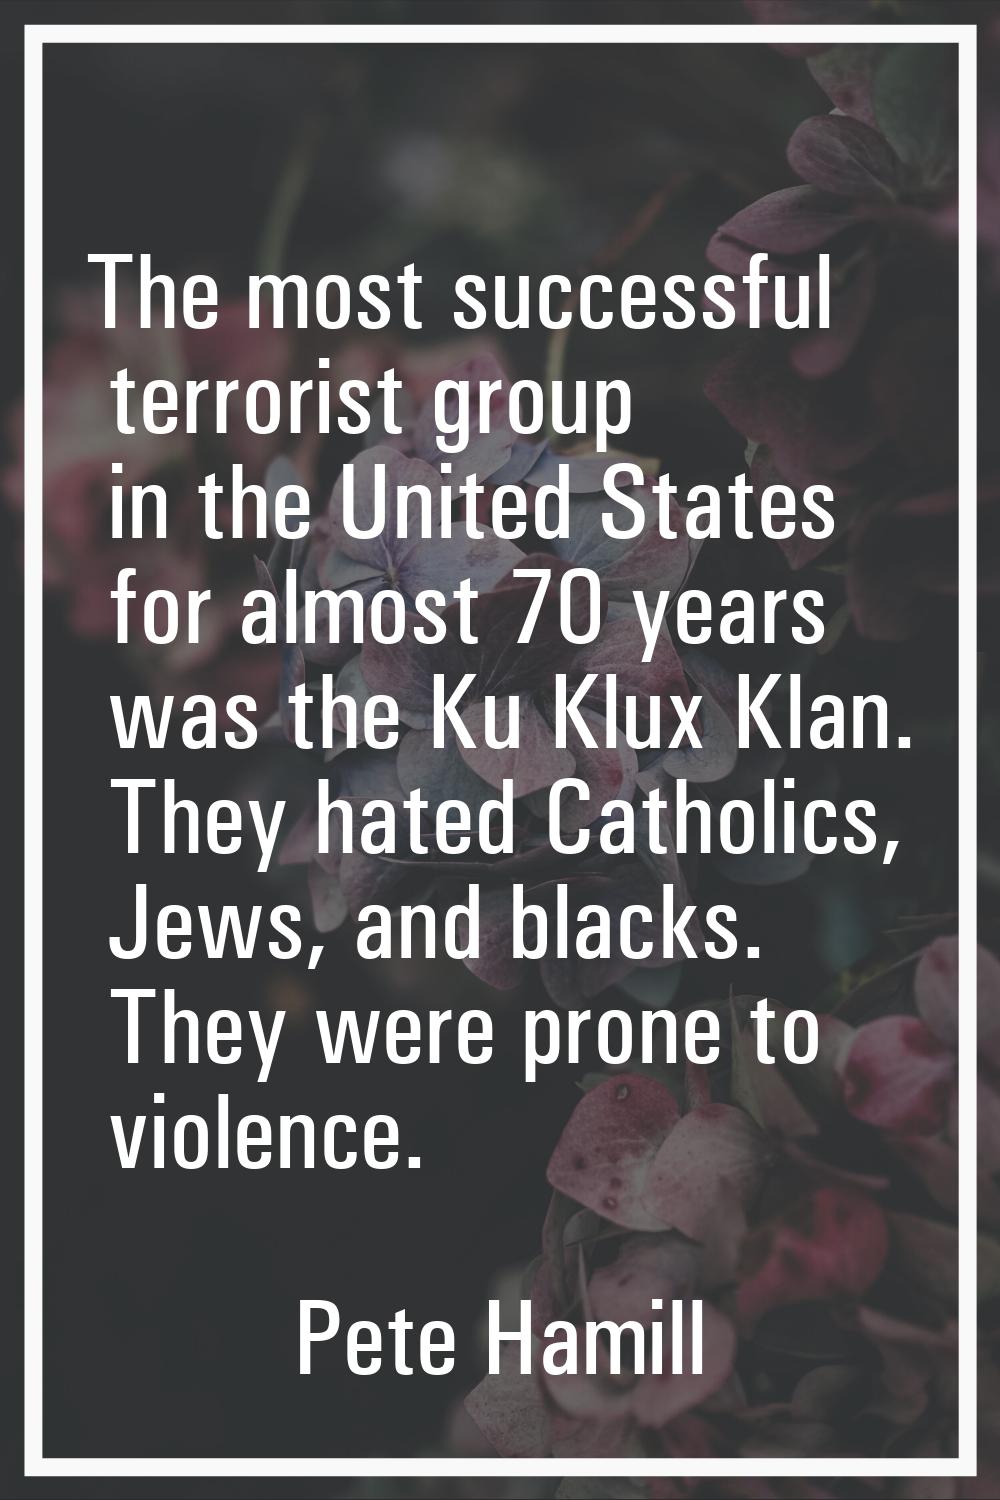 The most successful terrorist group in the United States for almost 70 years was the Ku Klux Klan. 